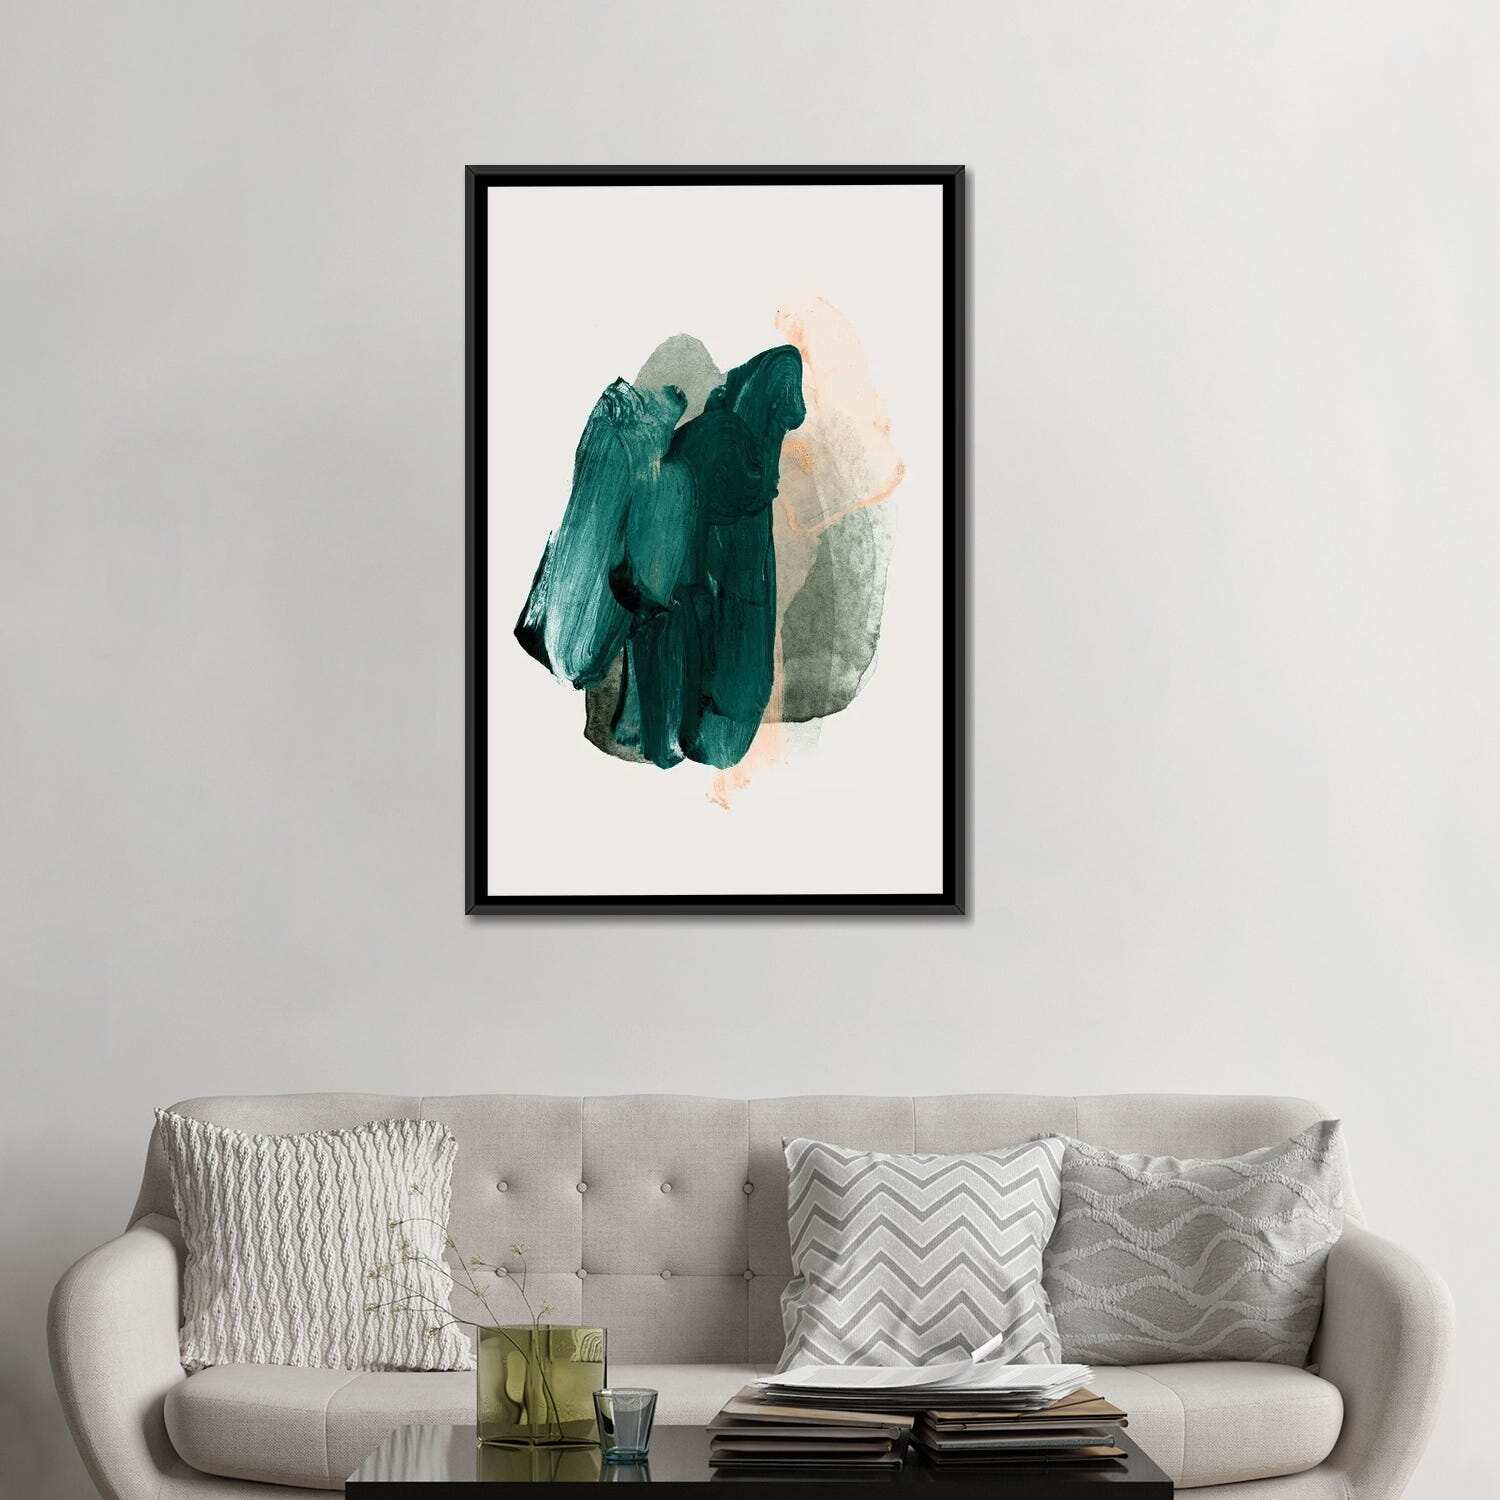 iCanvas "Emerald Green" by LEEMO Framed Canvas Print